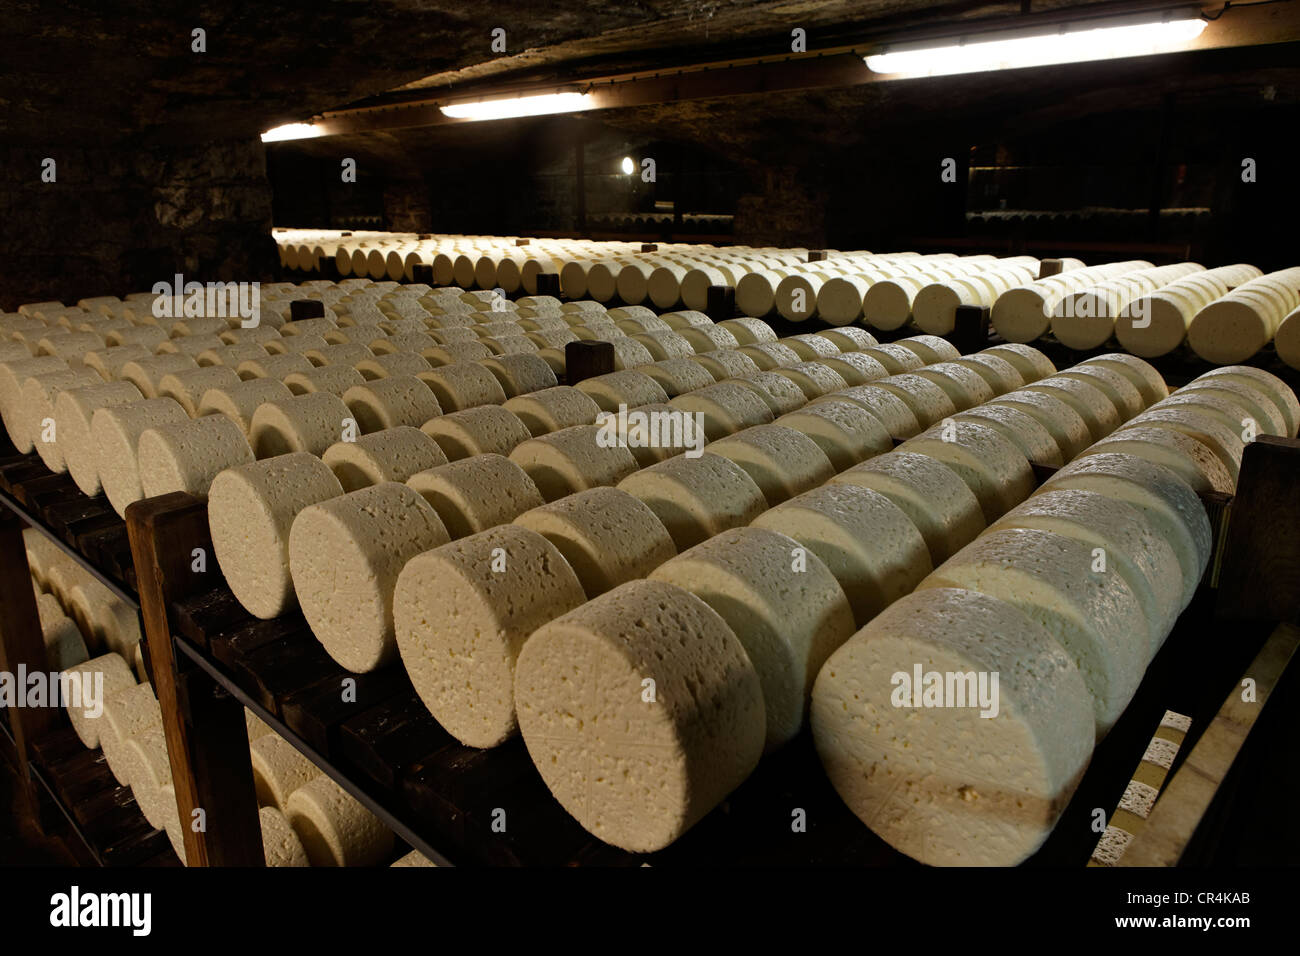 Rows of cheese stored in the maturing cellars of the Roquefort Societe, Roquefort-sur-Soulzon, Aveyron, France, Europe, Stock Photo